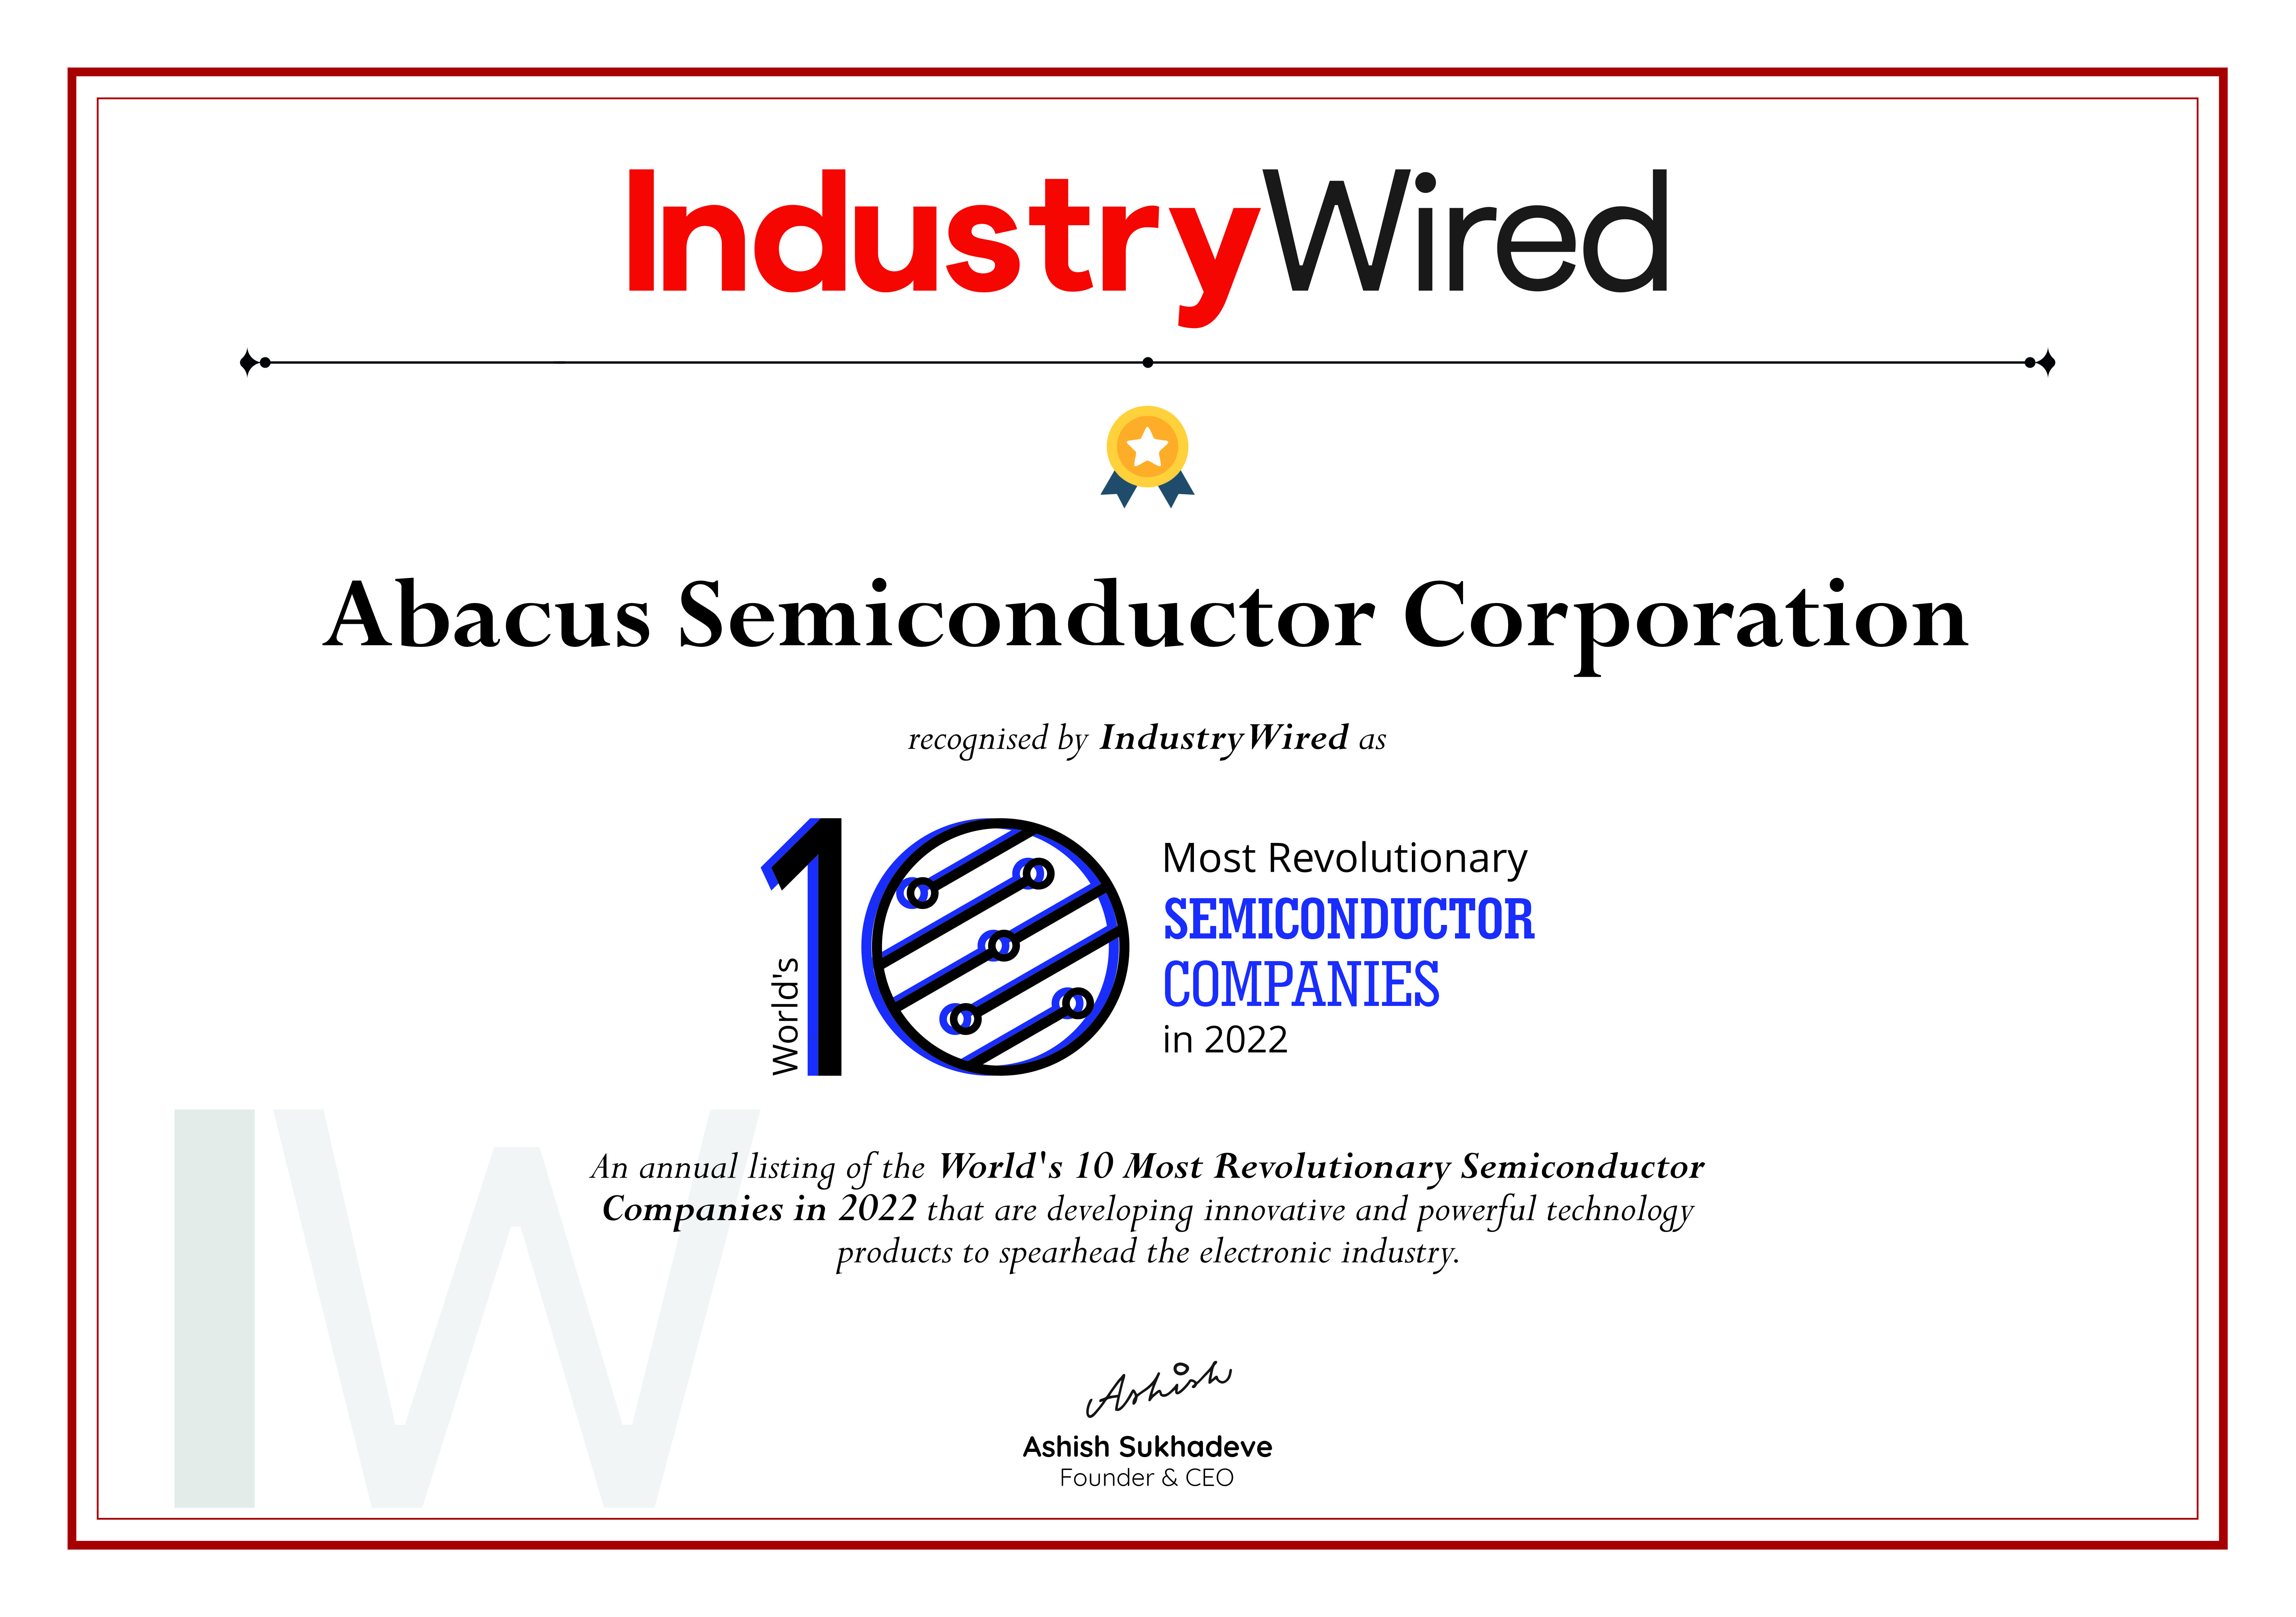 Industry Wired 10 Most Revolutionary Semiconductor Companies 2022